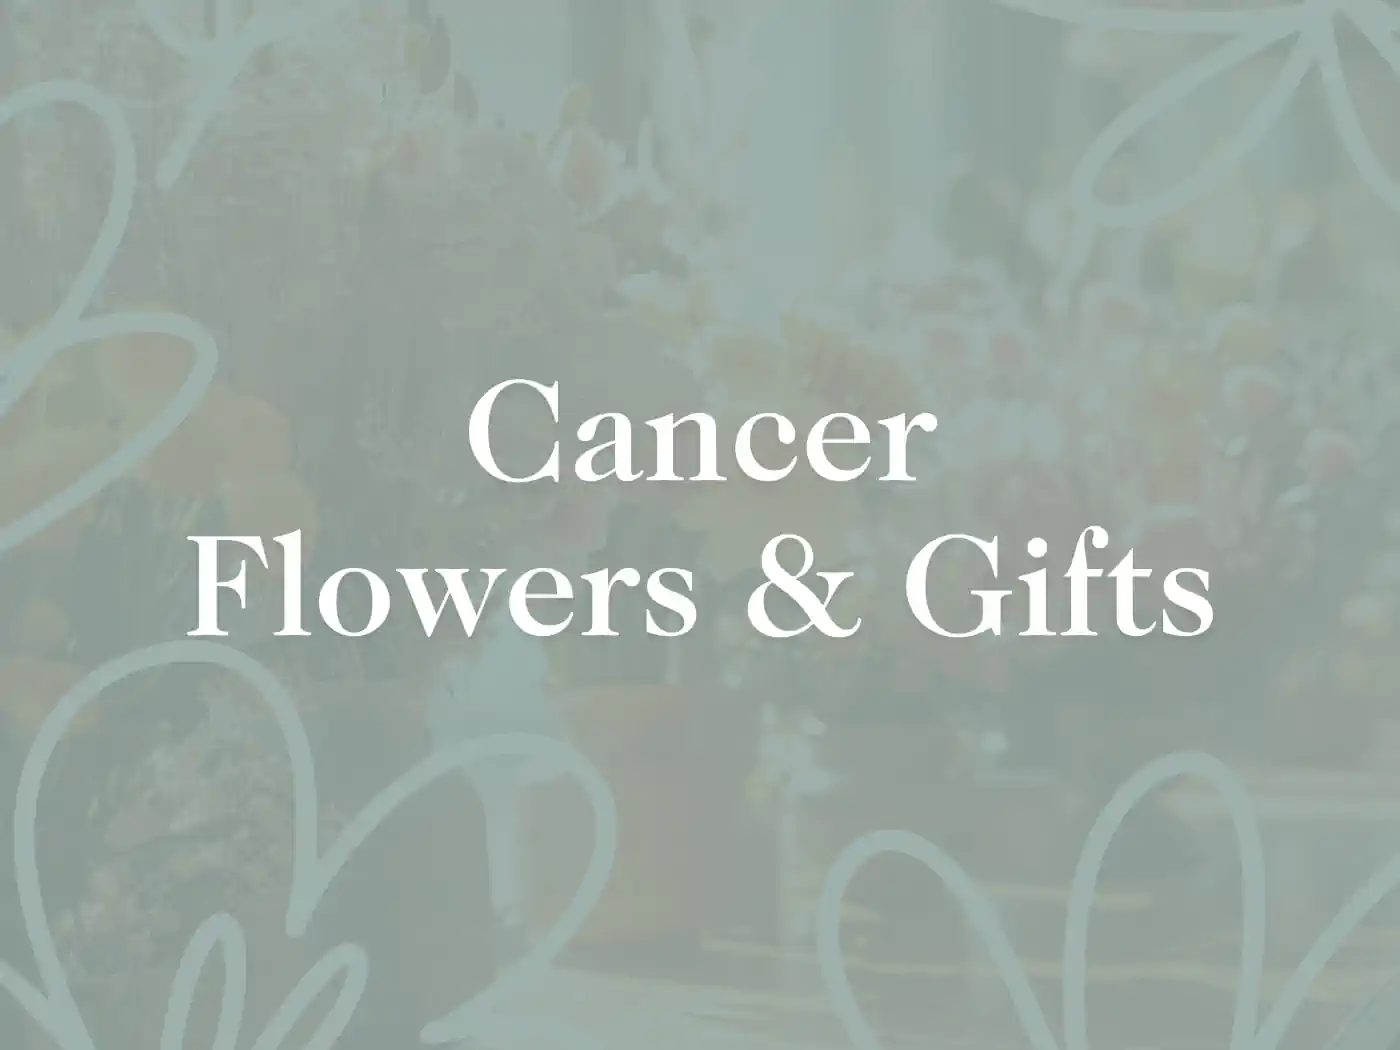  Delicate flowers arranged beautifully with the text "Cancer Flowers & Gifts" overlay - Fabulous Flowers and Gifts.